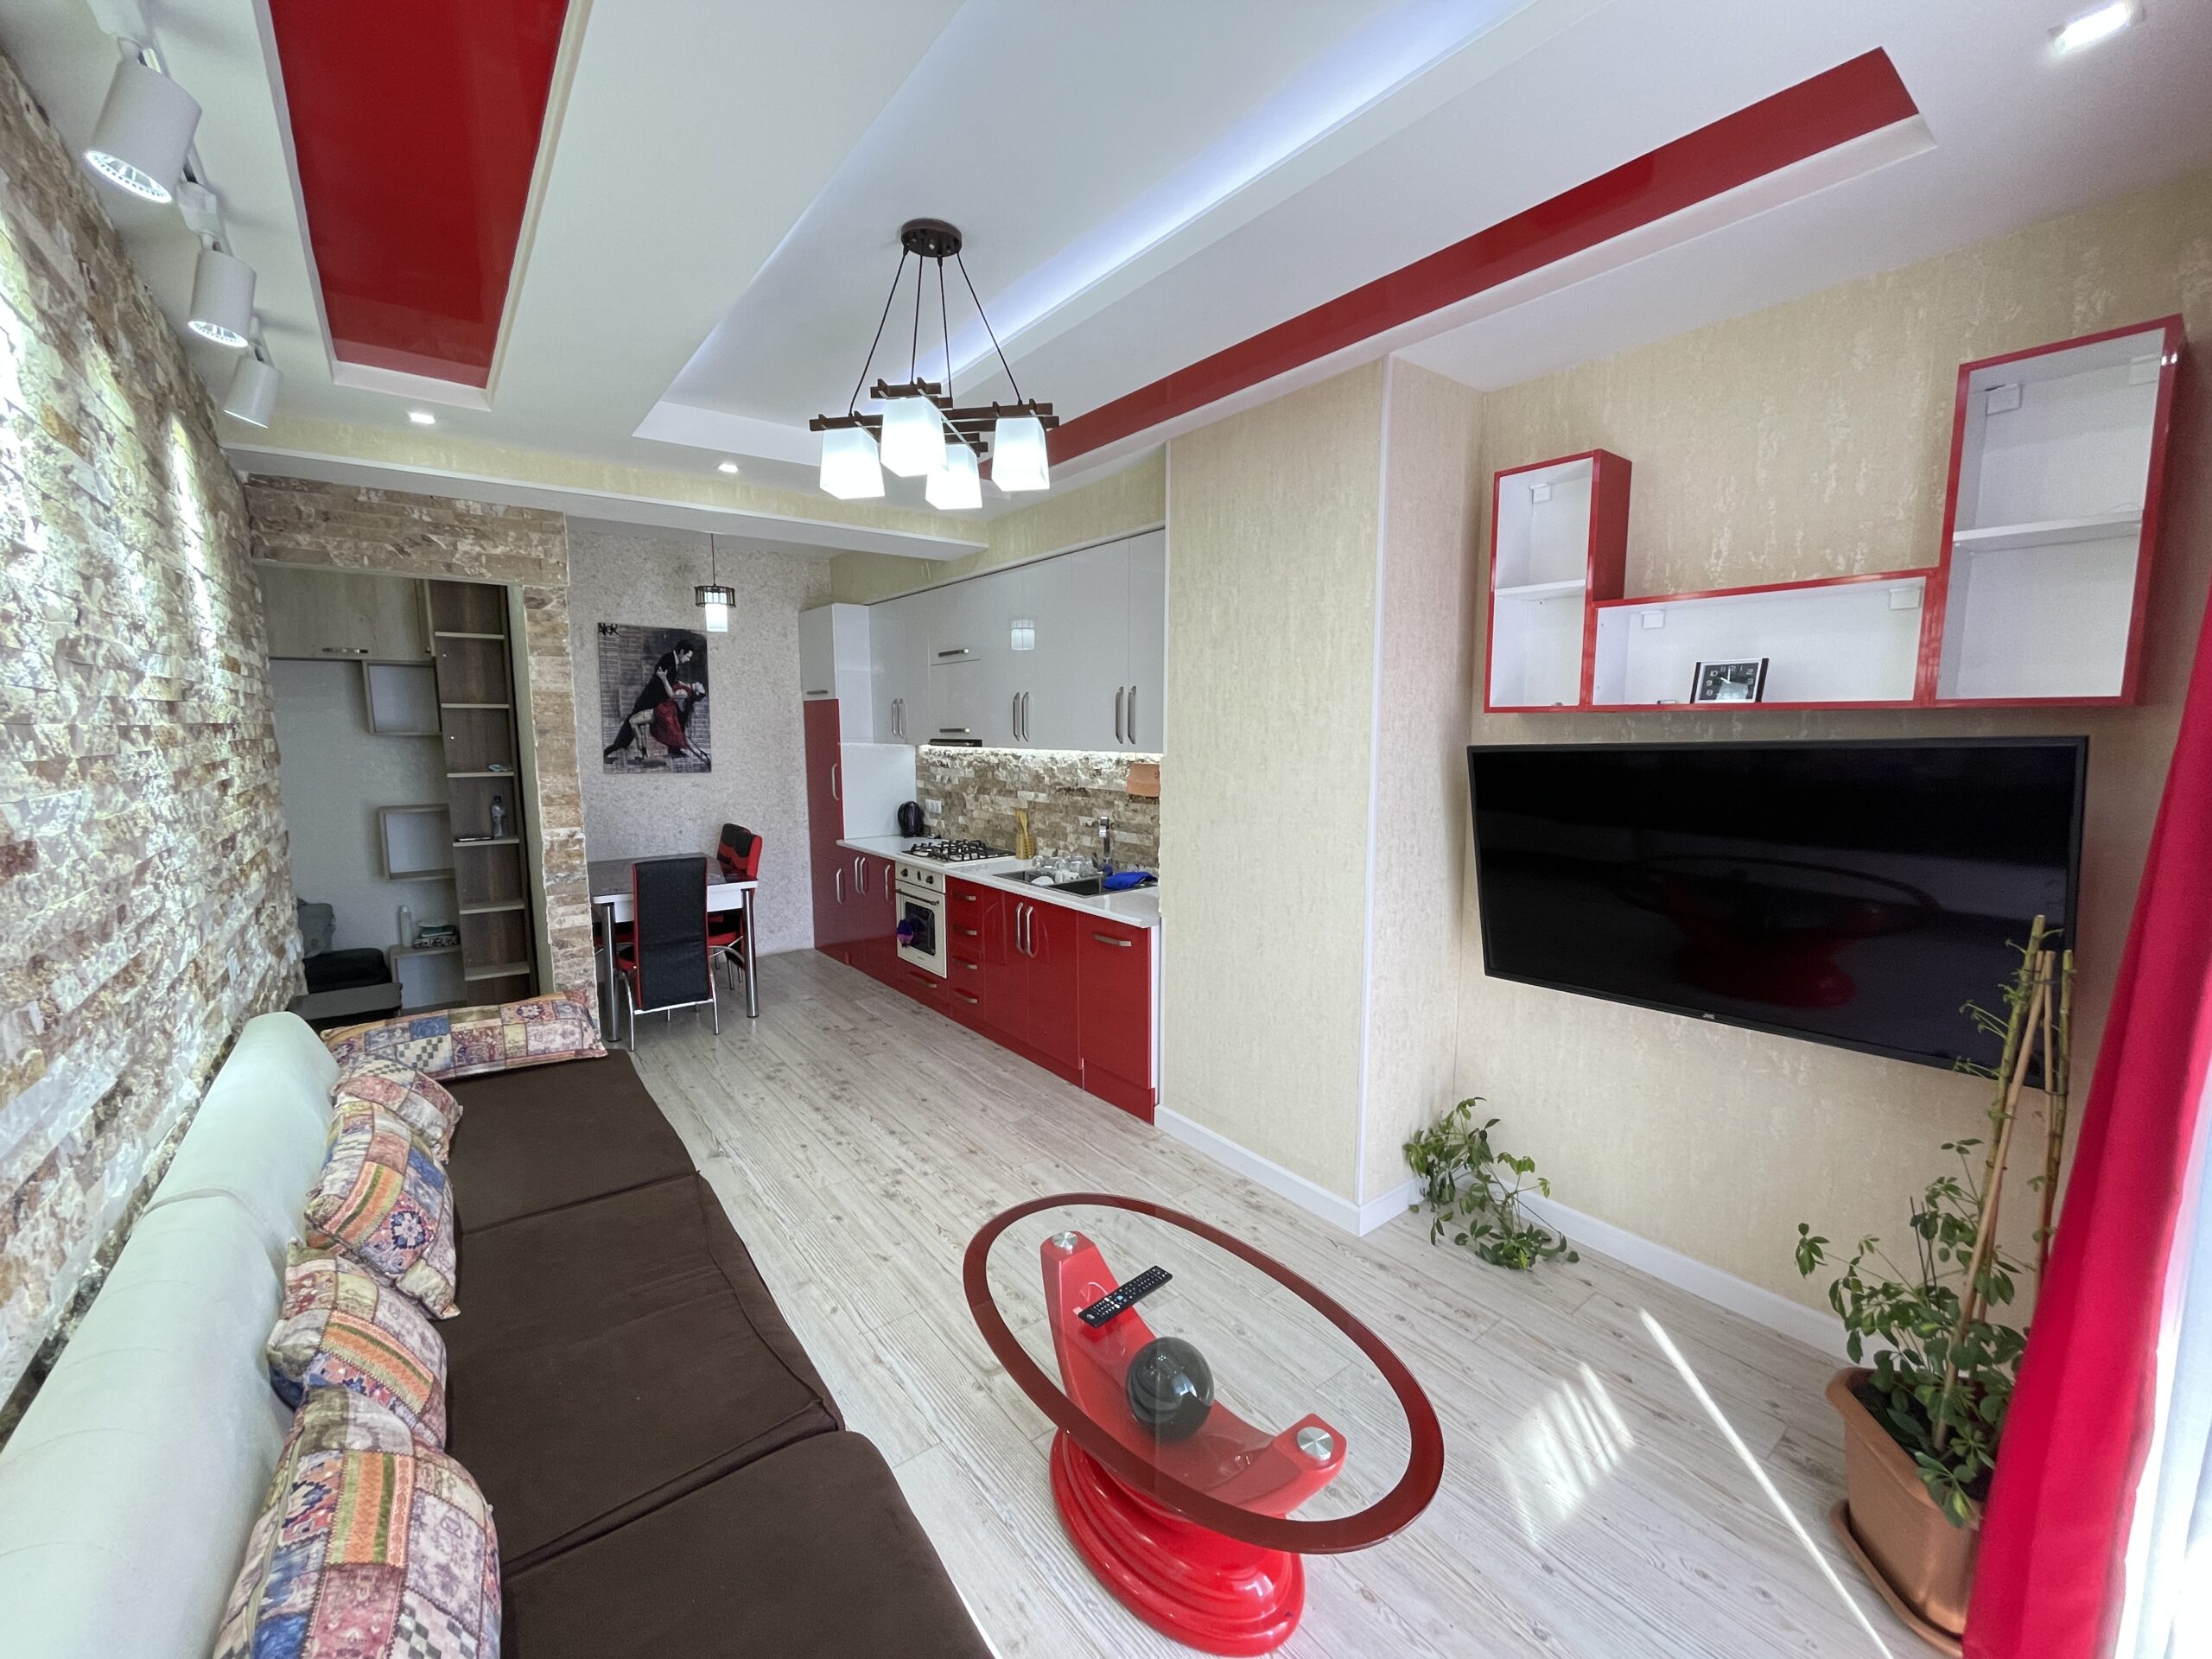 2-Room Apartment For Rent at “Archi Isani”, near Carrefour